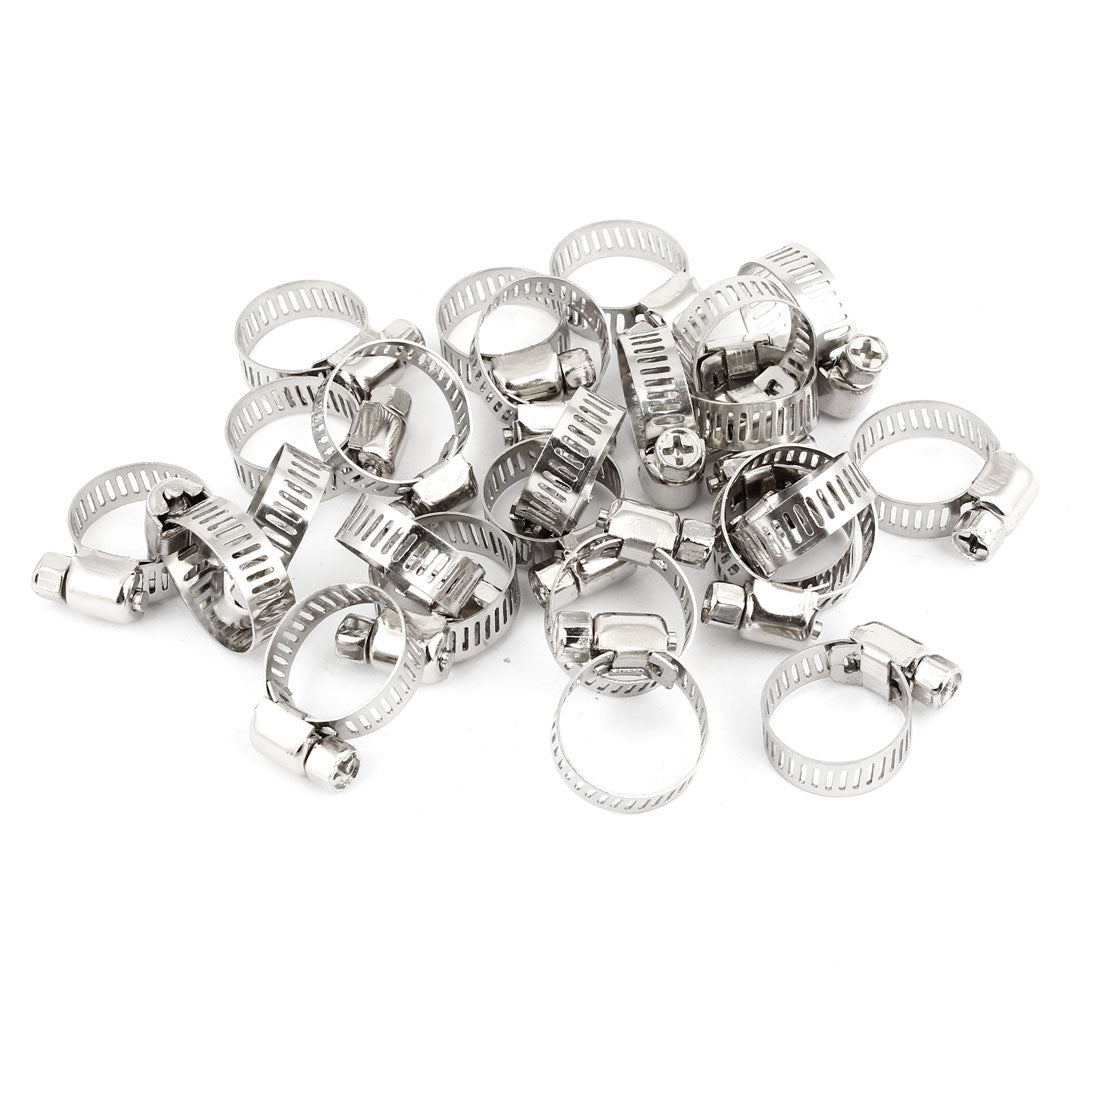 uxcell Uxcell 25 Pcs Stainless Steel Band  Gear Hose Clamp 13-19mm